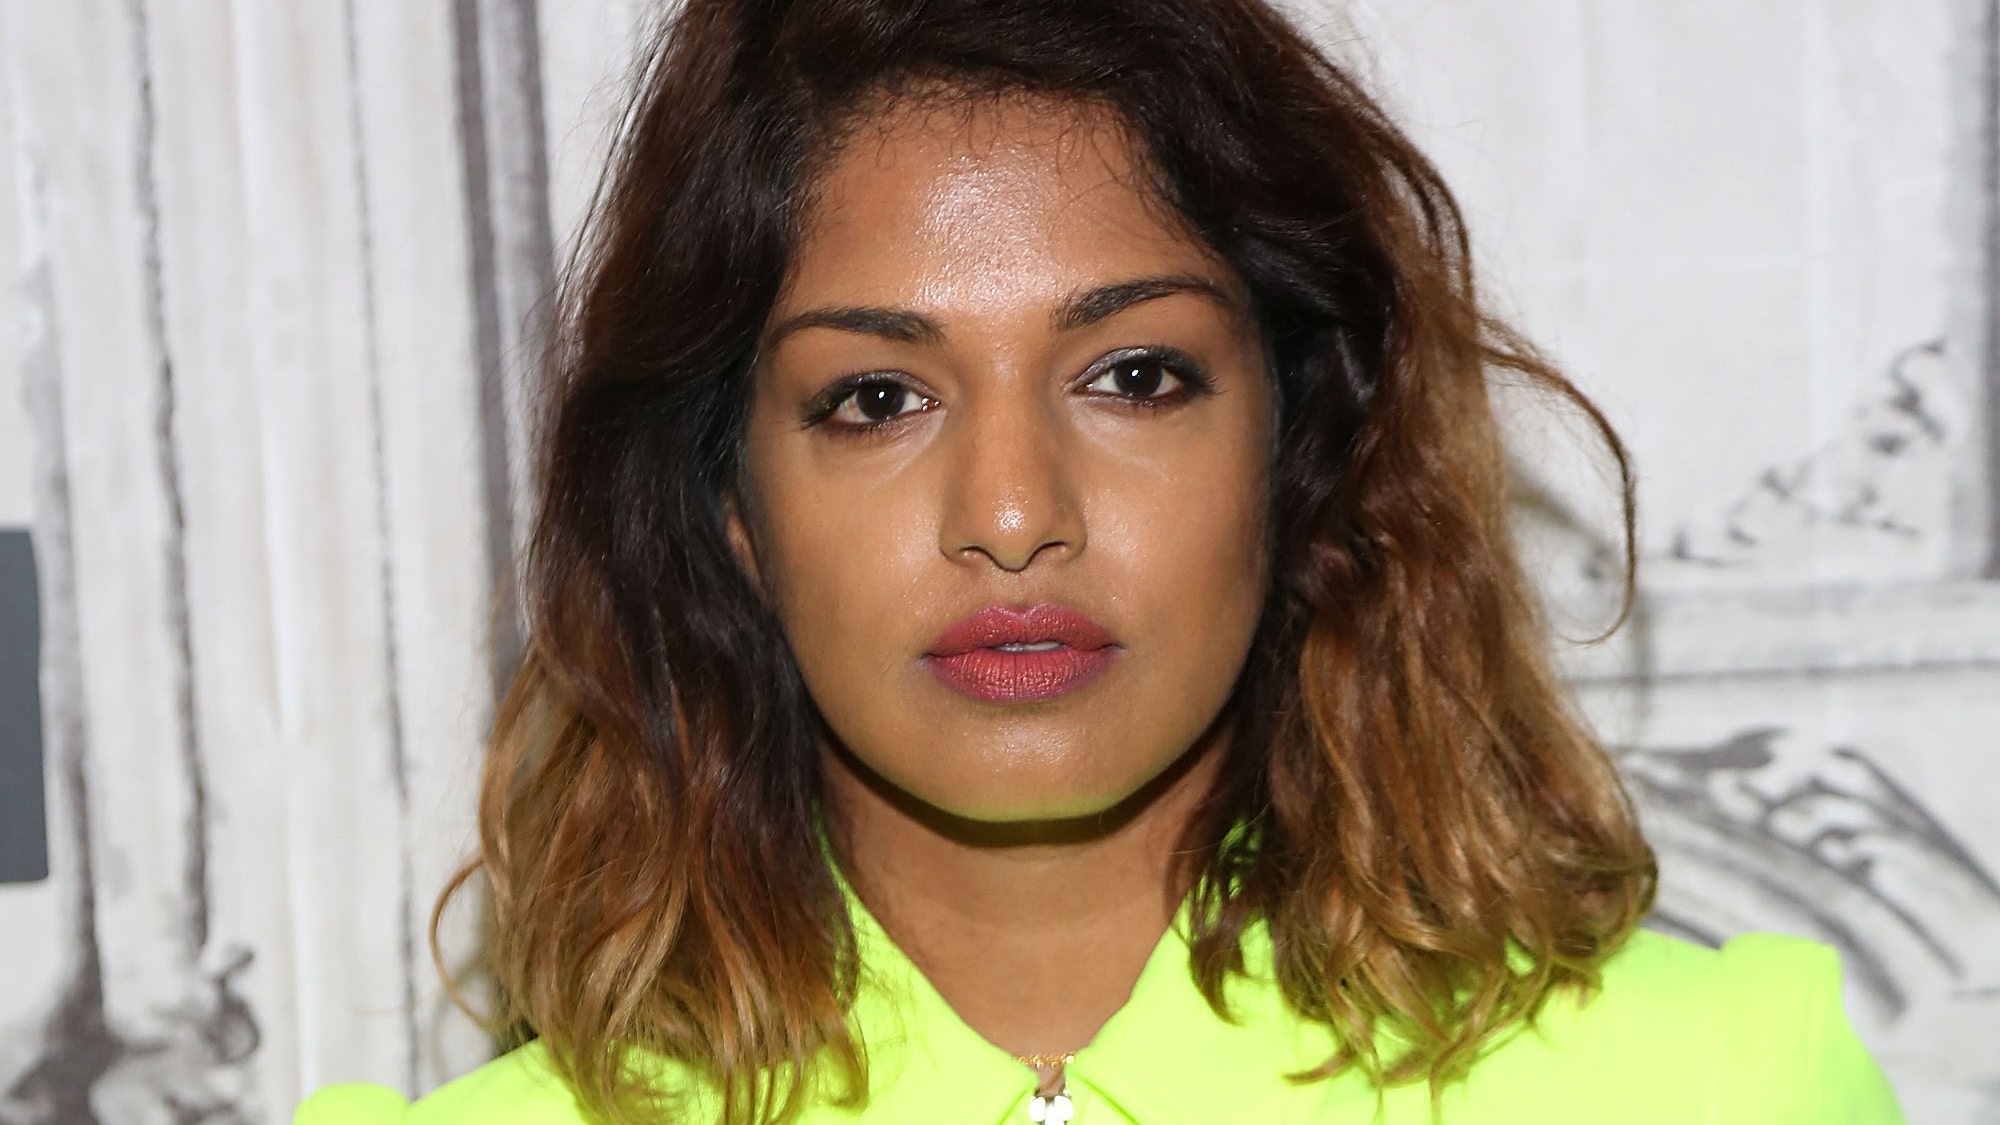 Singer M.I.A. says she faced 'biggest backlash' to career after saying 'Jesus is real'